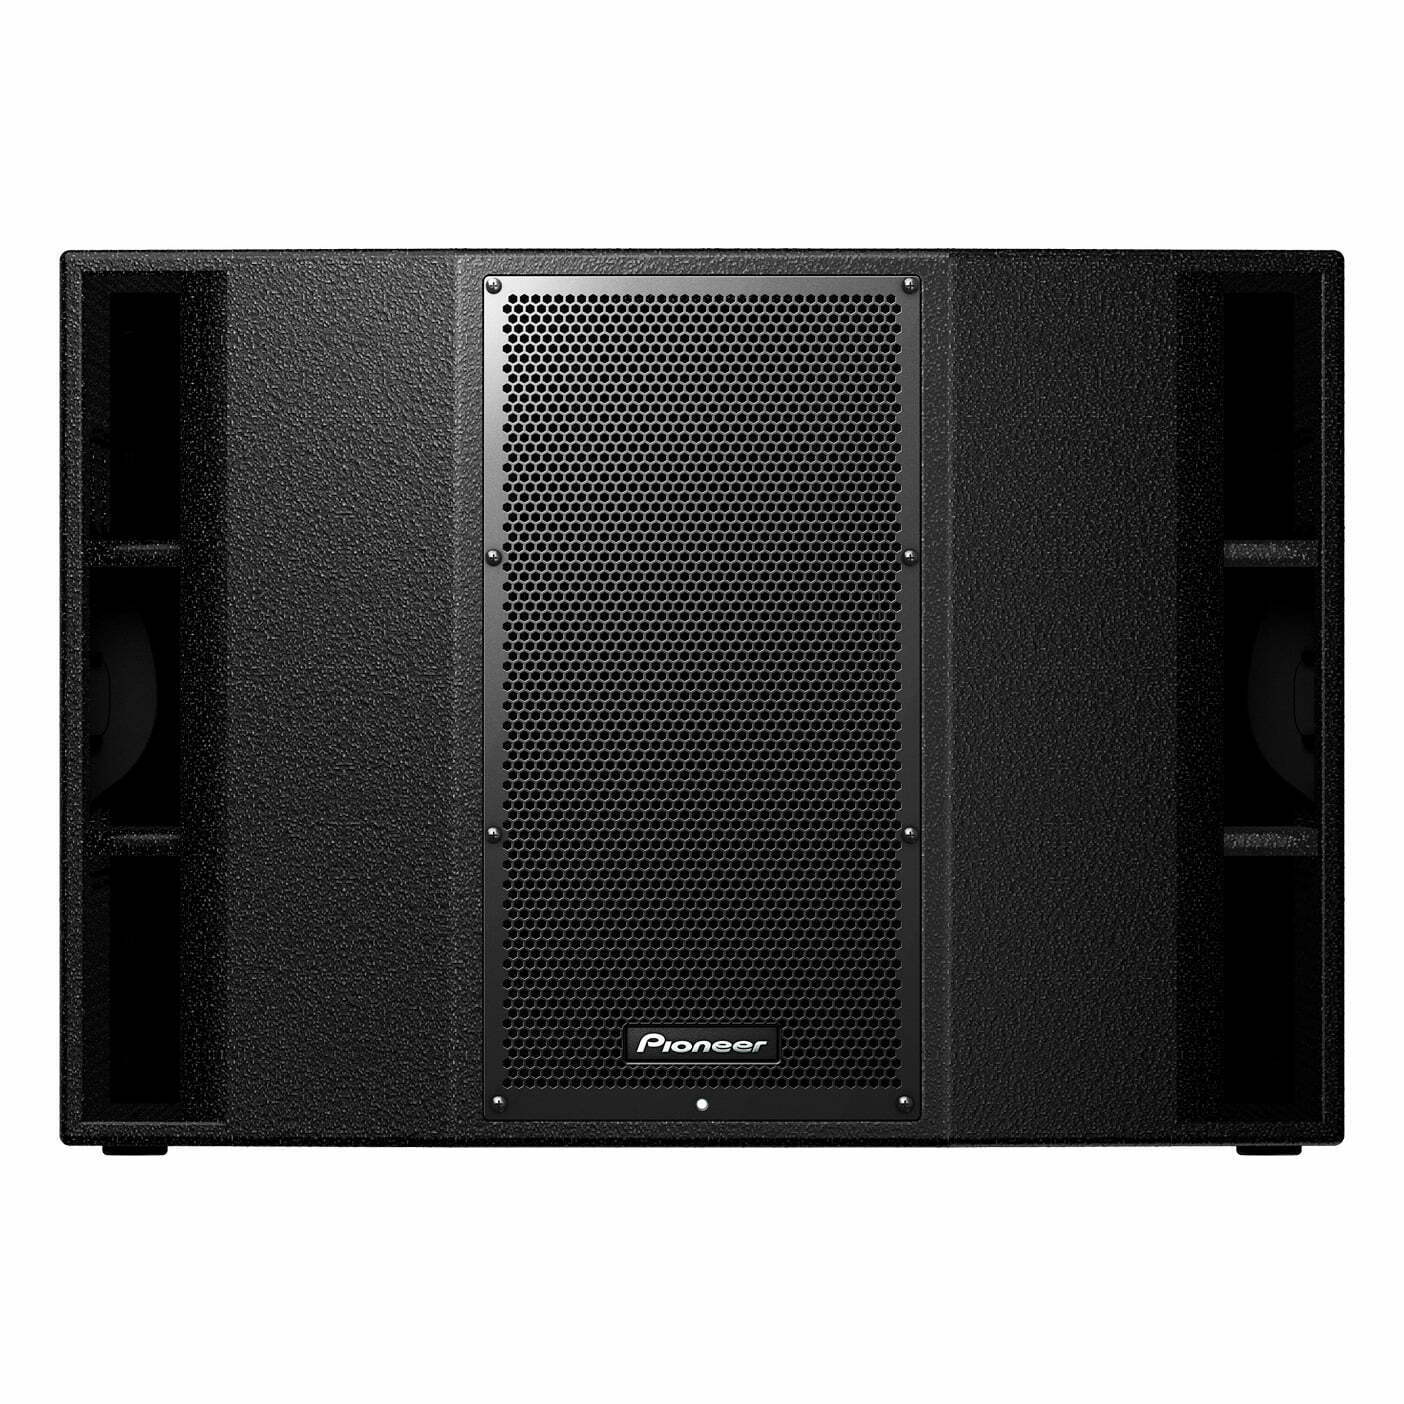 pioneer_xprs215s_photo_front|pioneer_xprs215s_photo_angle|pioneer_xprs215s_photo_rear|pioneer_xprs215s_photo_side|XPRS_speaker_pr_dual-angle_A_low